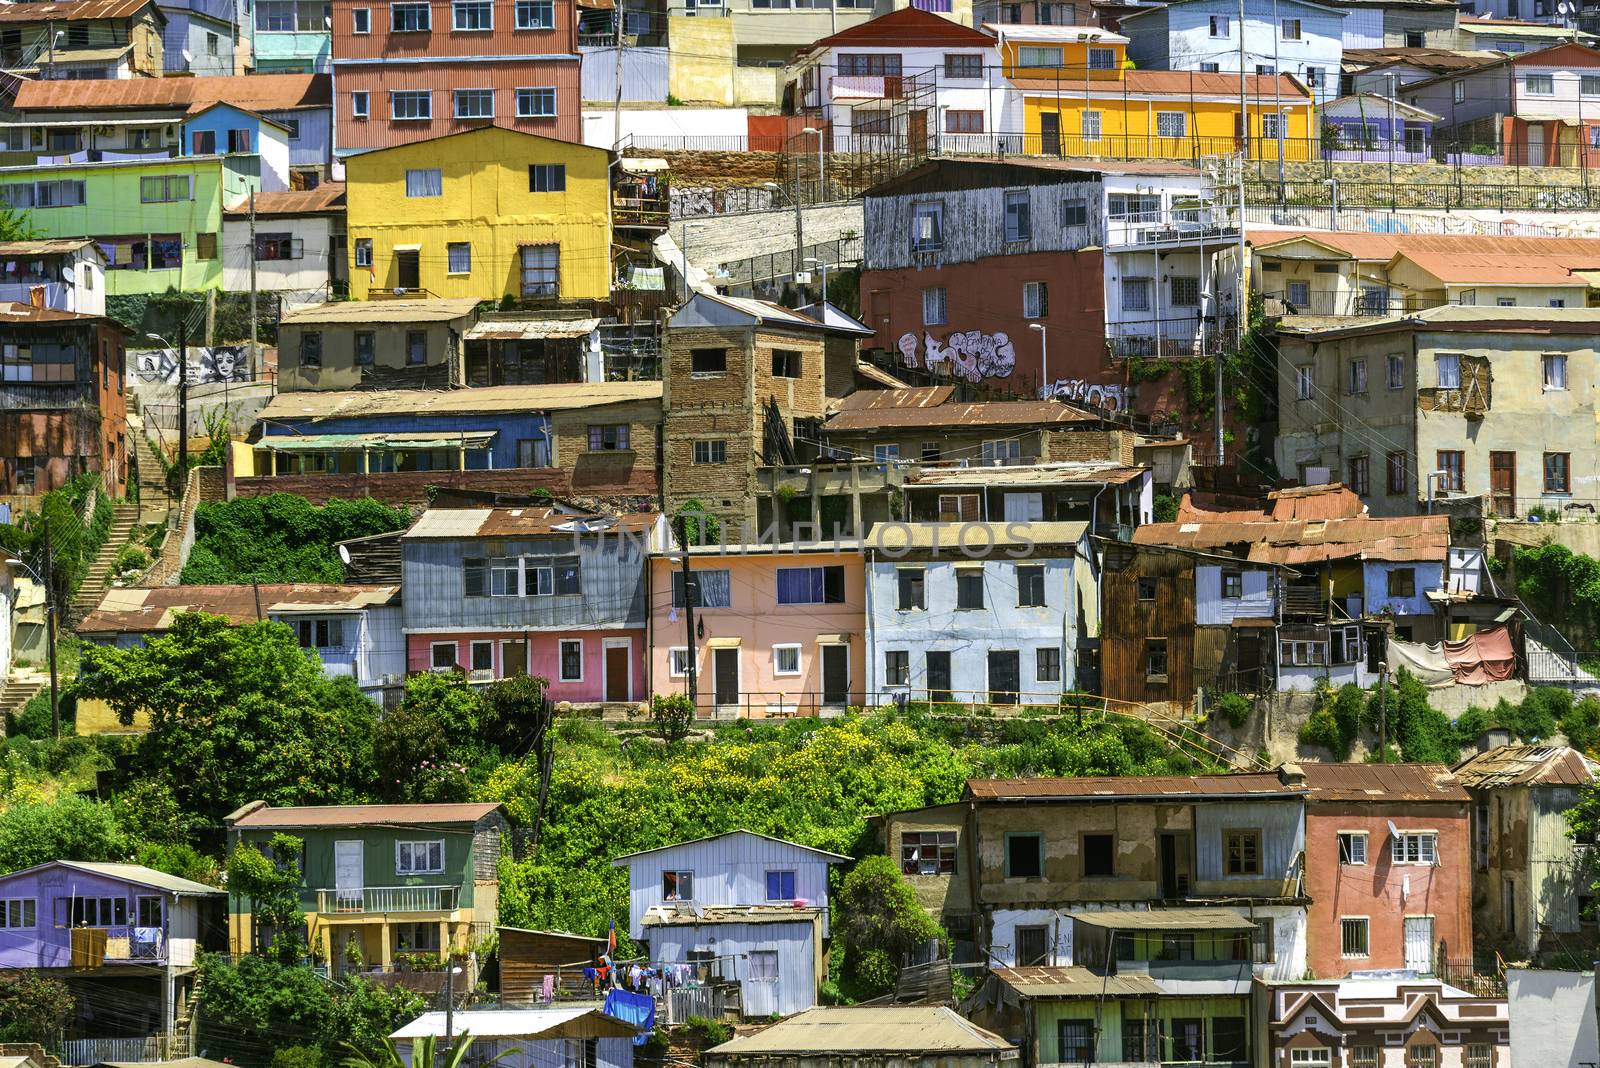 Valparaiso is a coastal town to the west of Chile. It's a 45 minute bus ride from the capital city, Santiago.